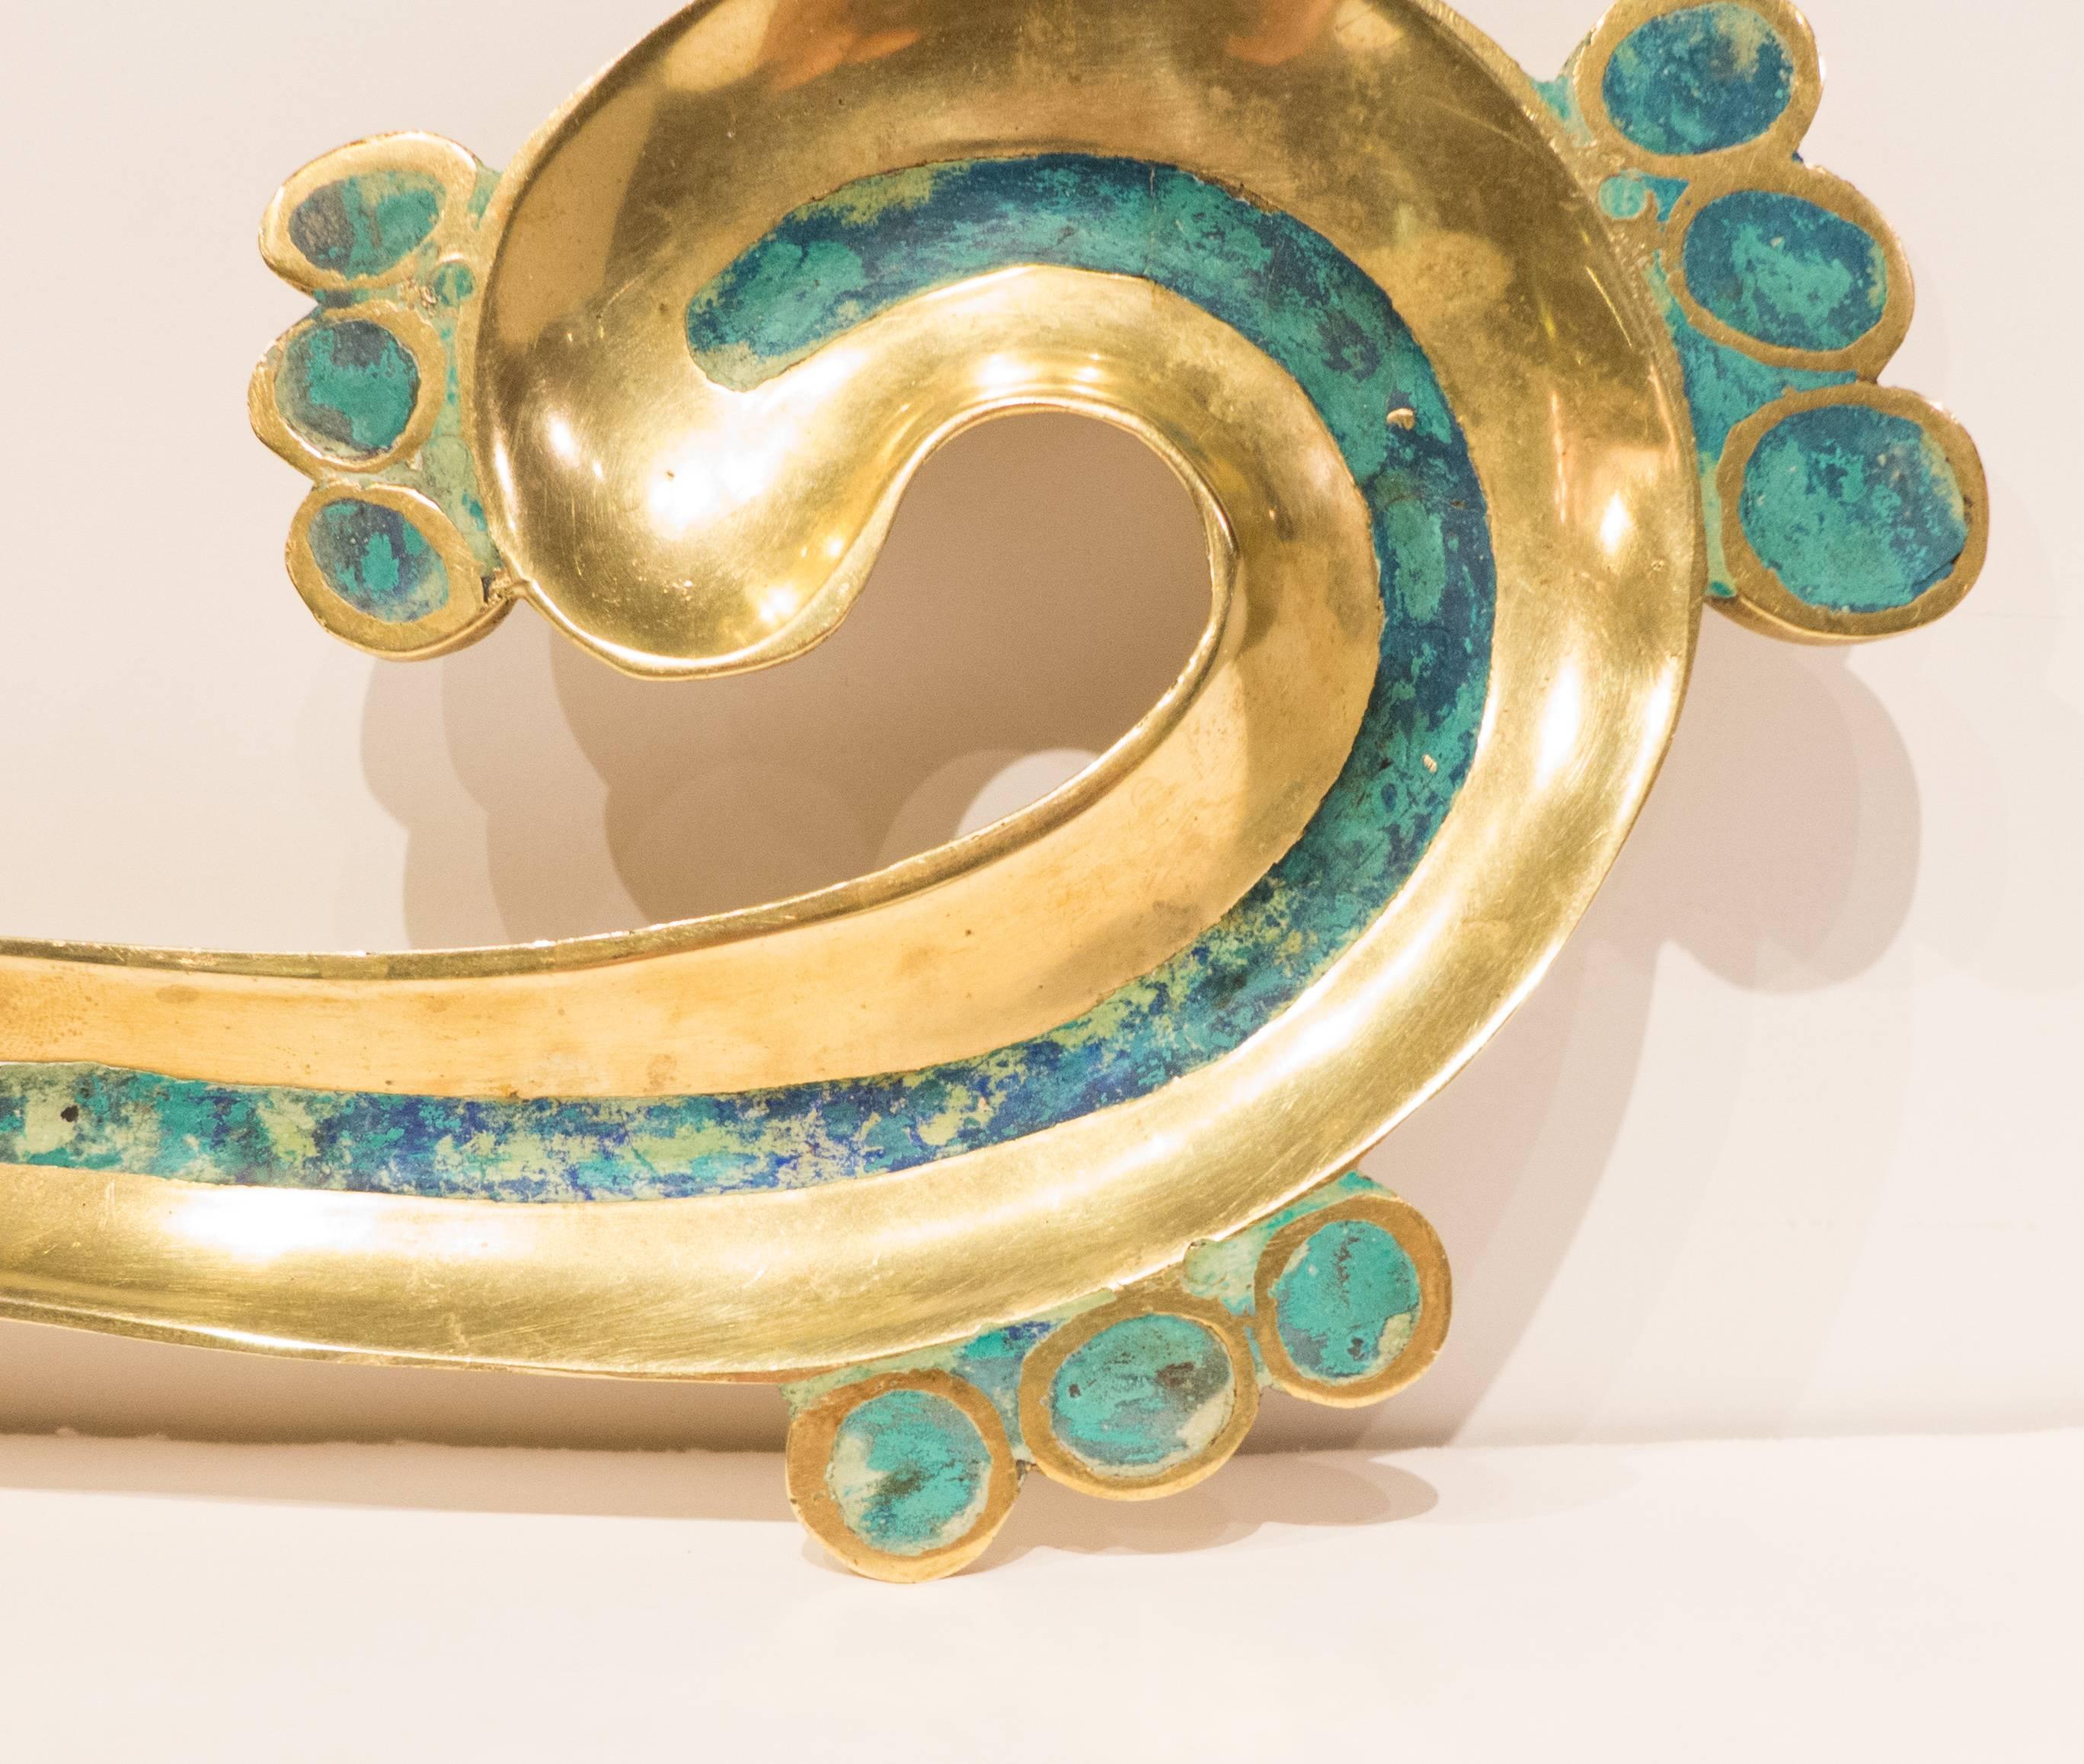 Eccentric-shaped dish or tray of cast brass with inlaid turquoise color ceramic. By Mexican designer/artist Pepe Mendoza, circa 1960s. With impressed marks.